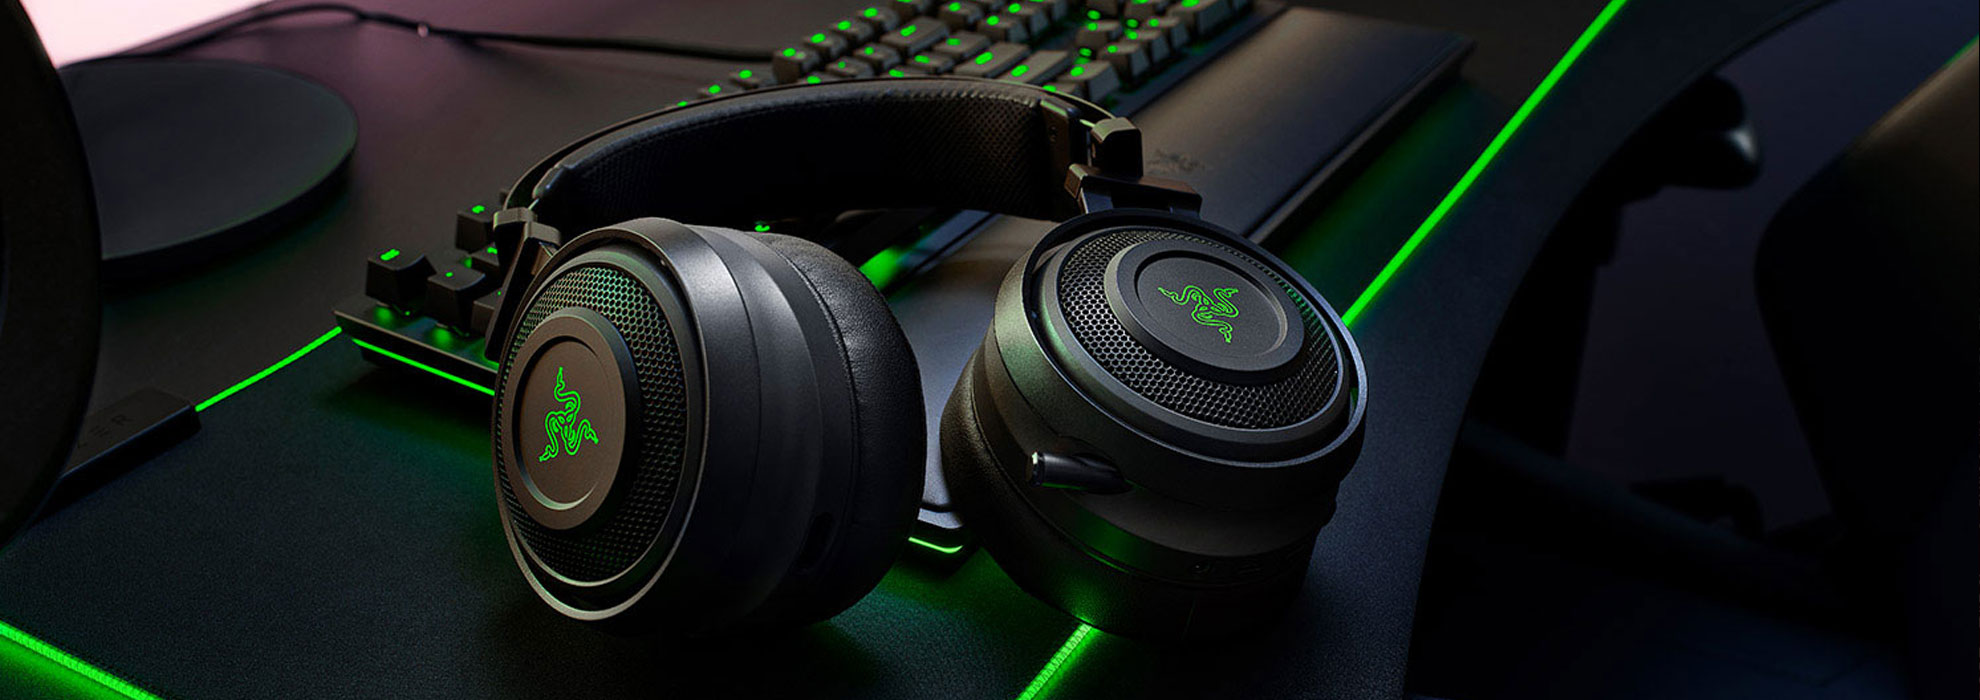 Gaming Headset and Pro Gaming Headphones | Gaming Headsets